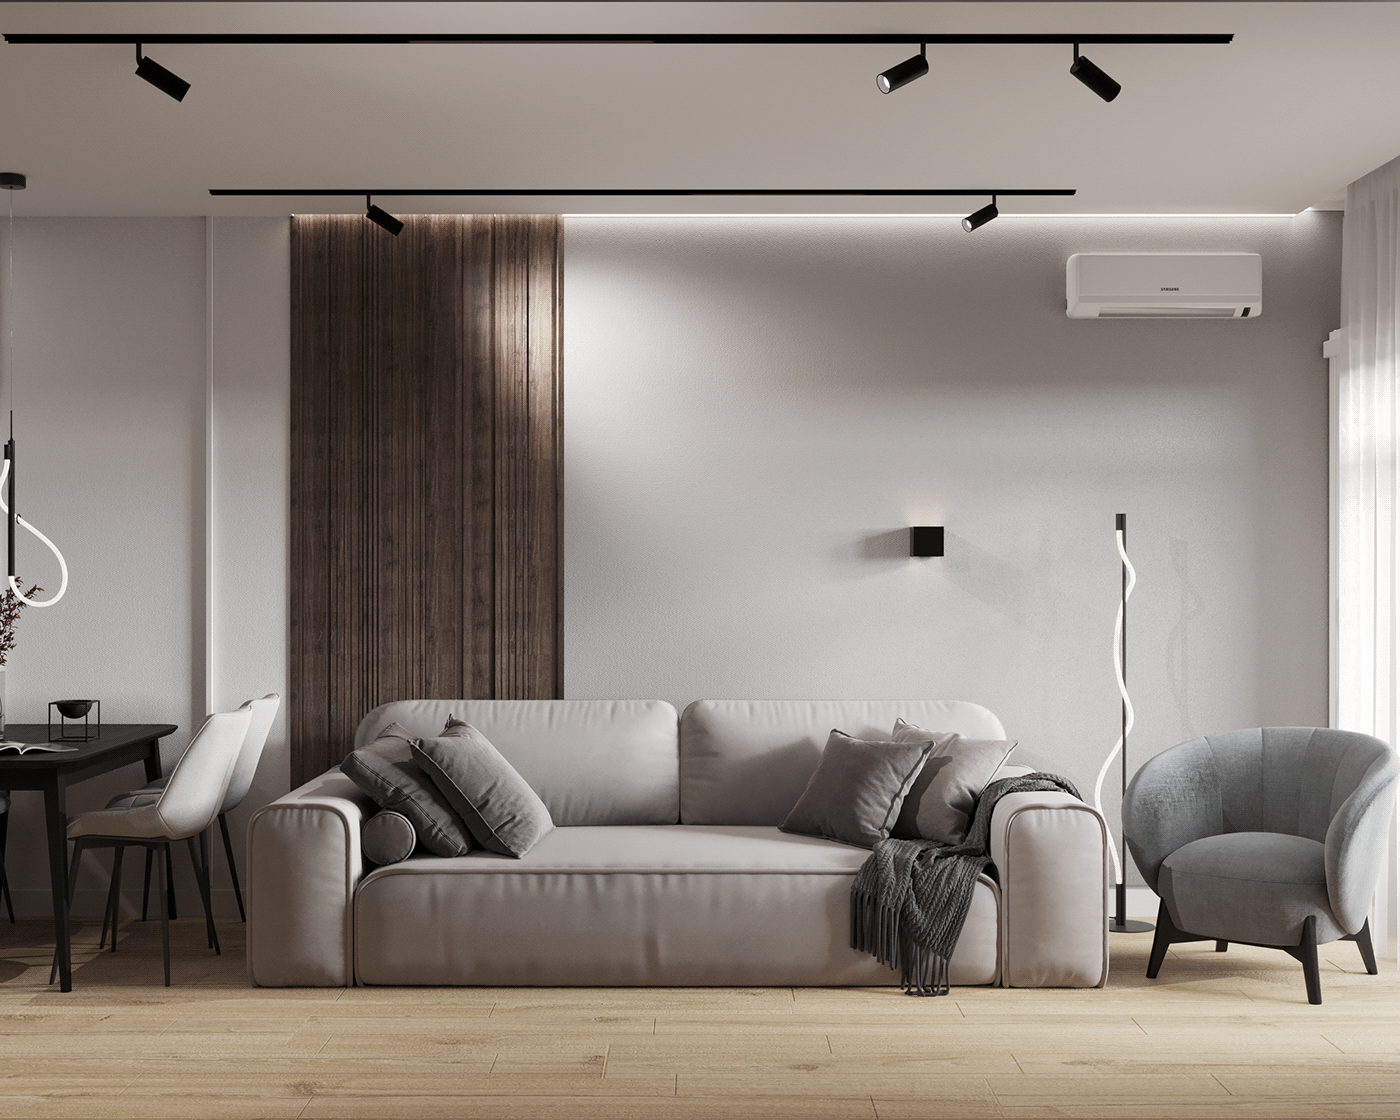 3ds max 3D room Render corona vray visualization living room architecture